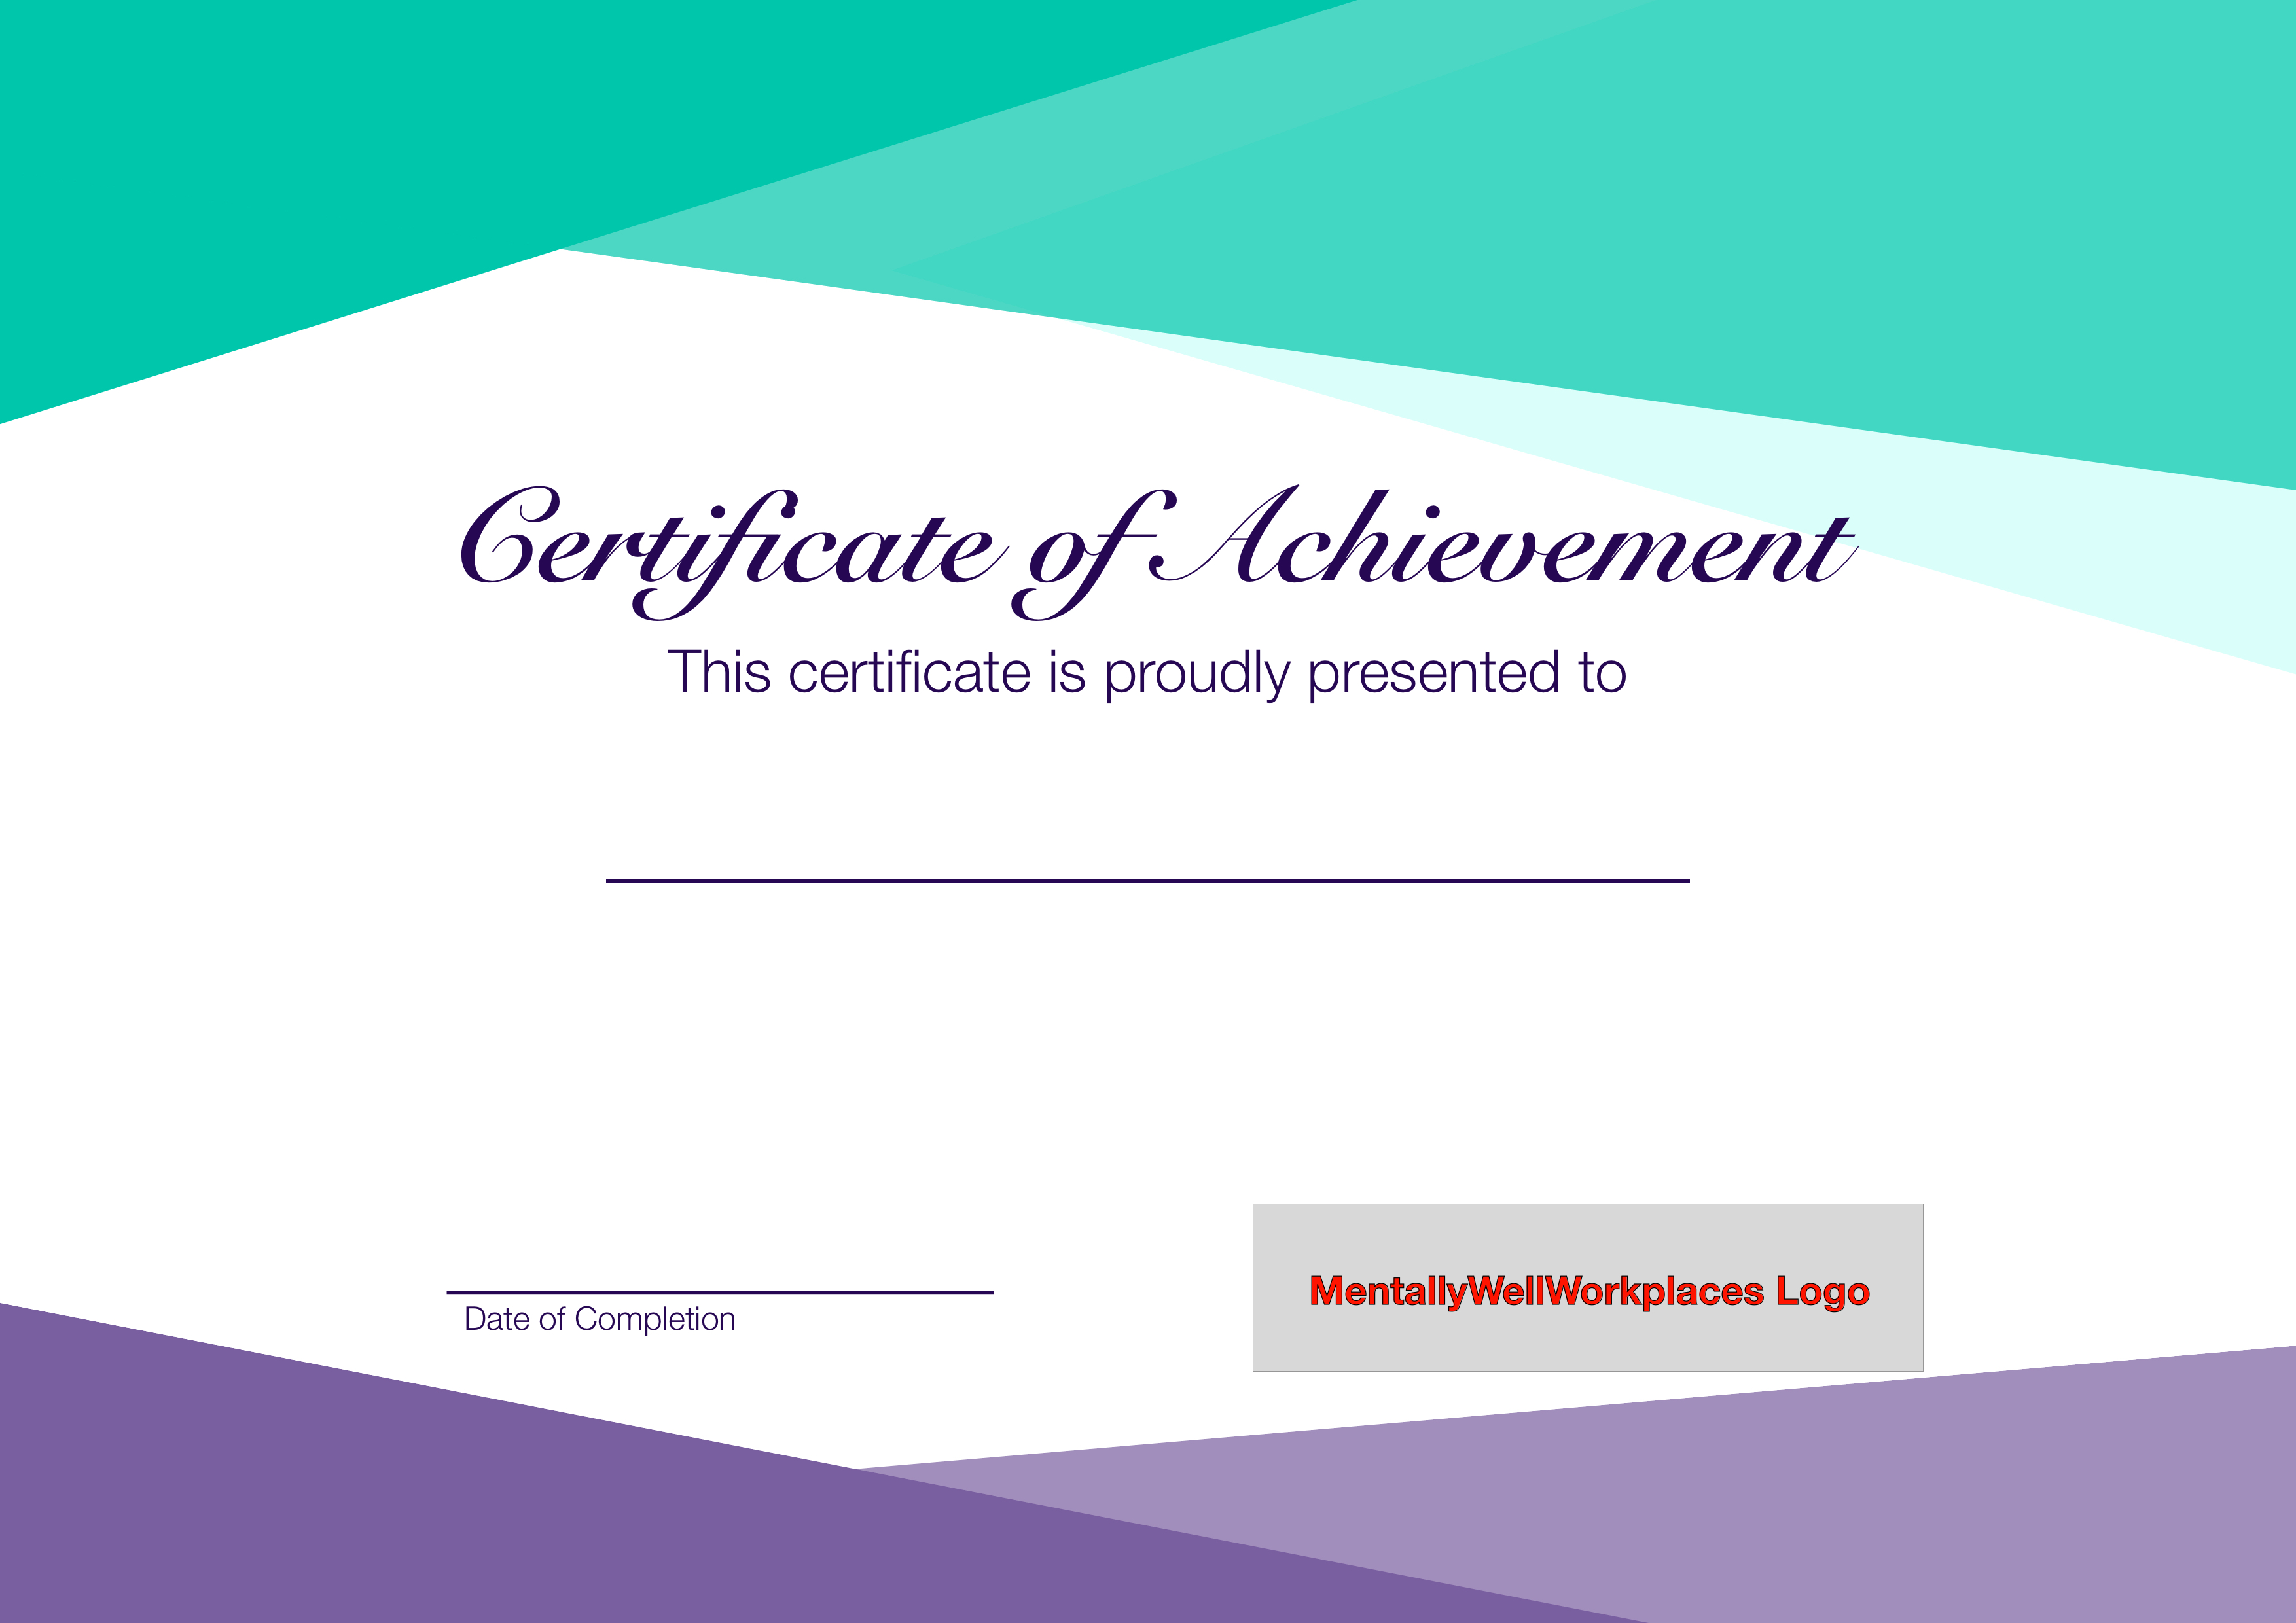 mental health induction certificate